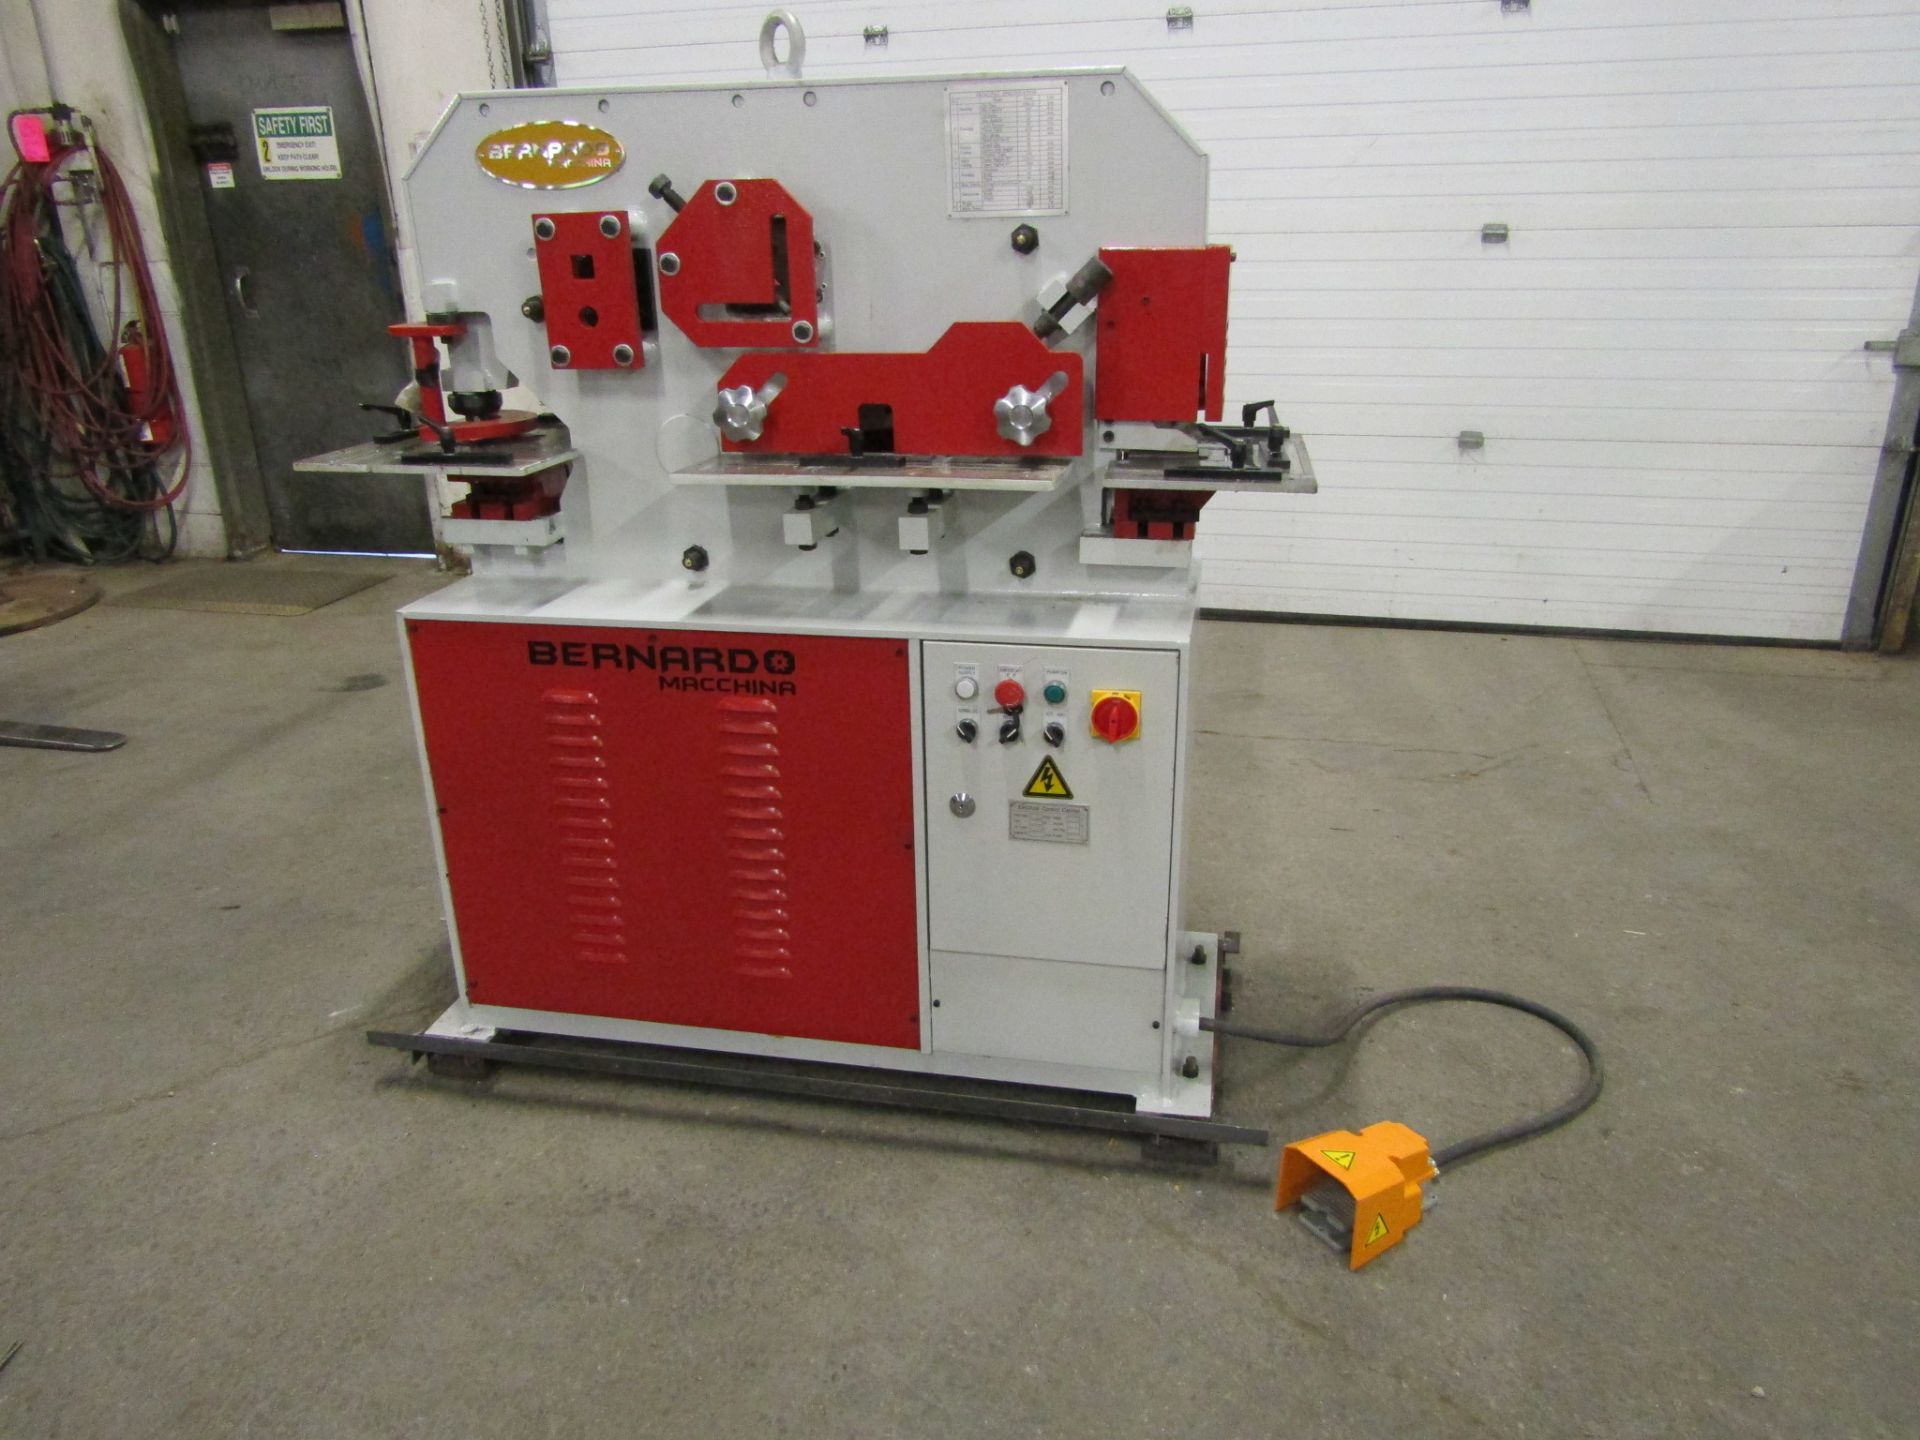 Bernardo Macchina 55 Ton Capacity Hydraulic Ironworker - complete with dies and punches - Dual - Image 2 of 3